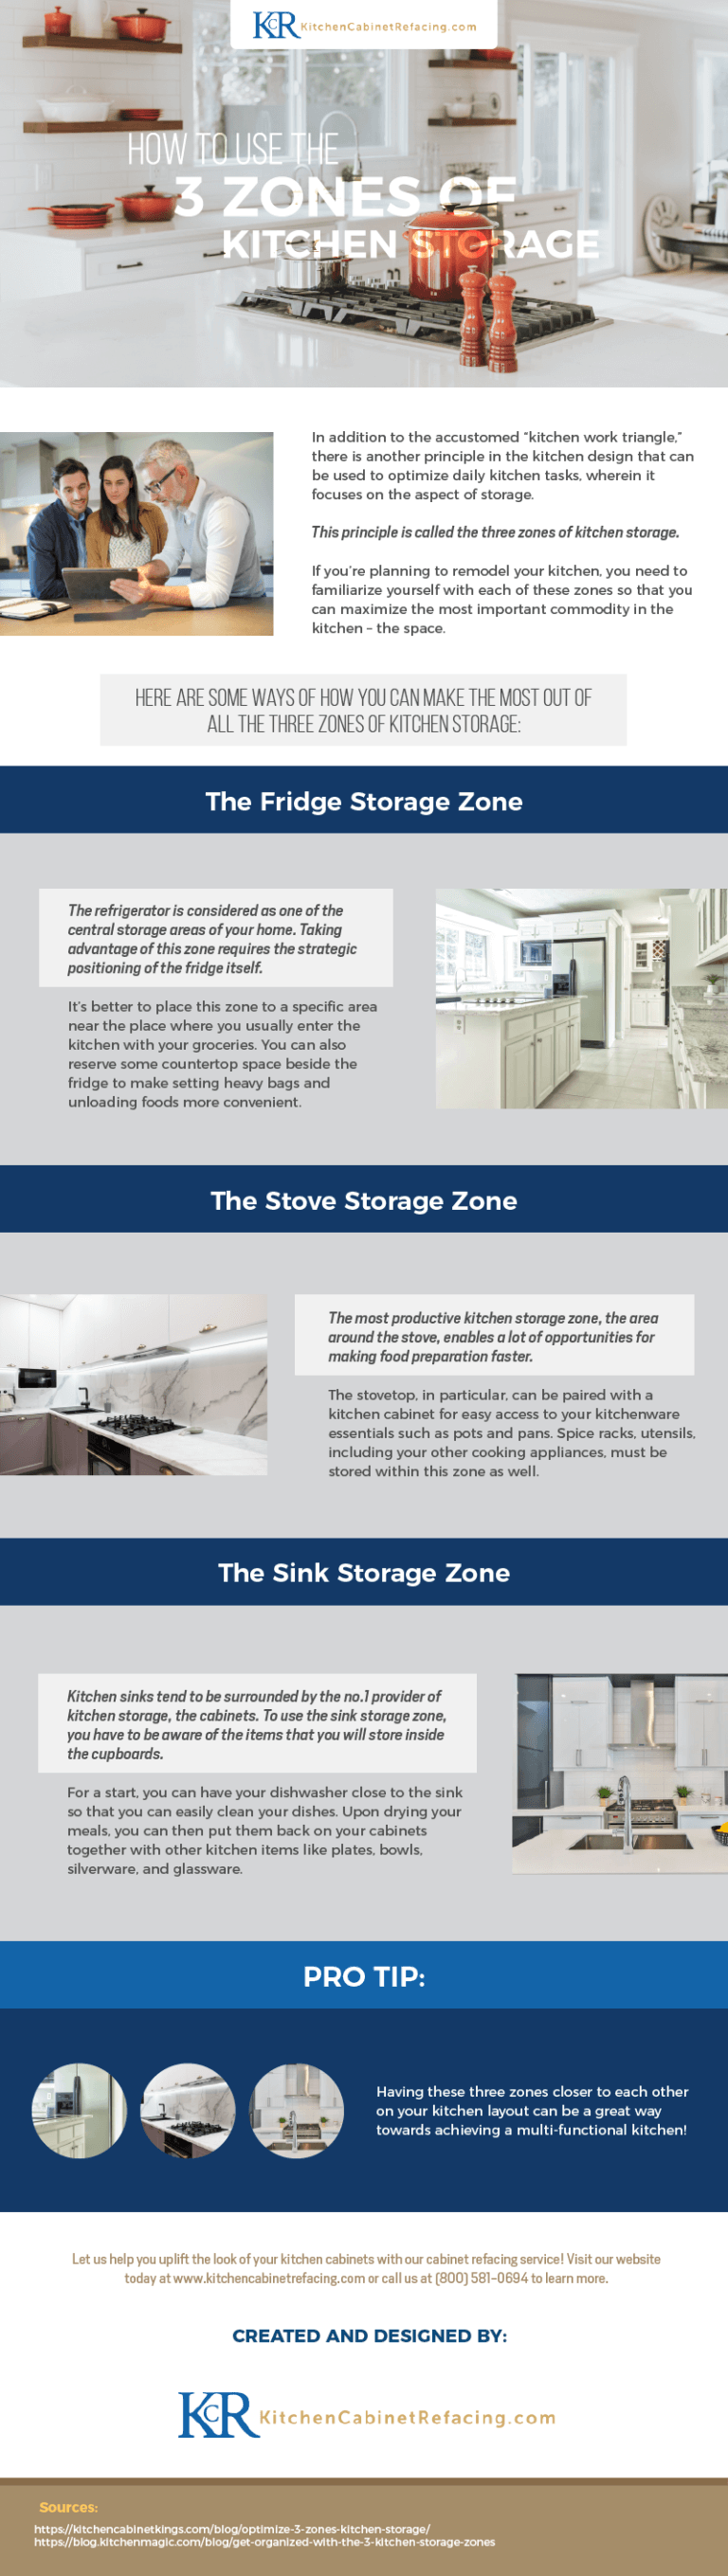 How-to-Use-the-3-Zones-of-Kitchen-Storage